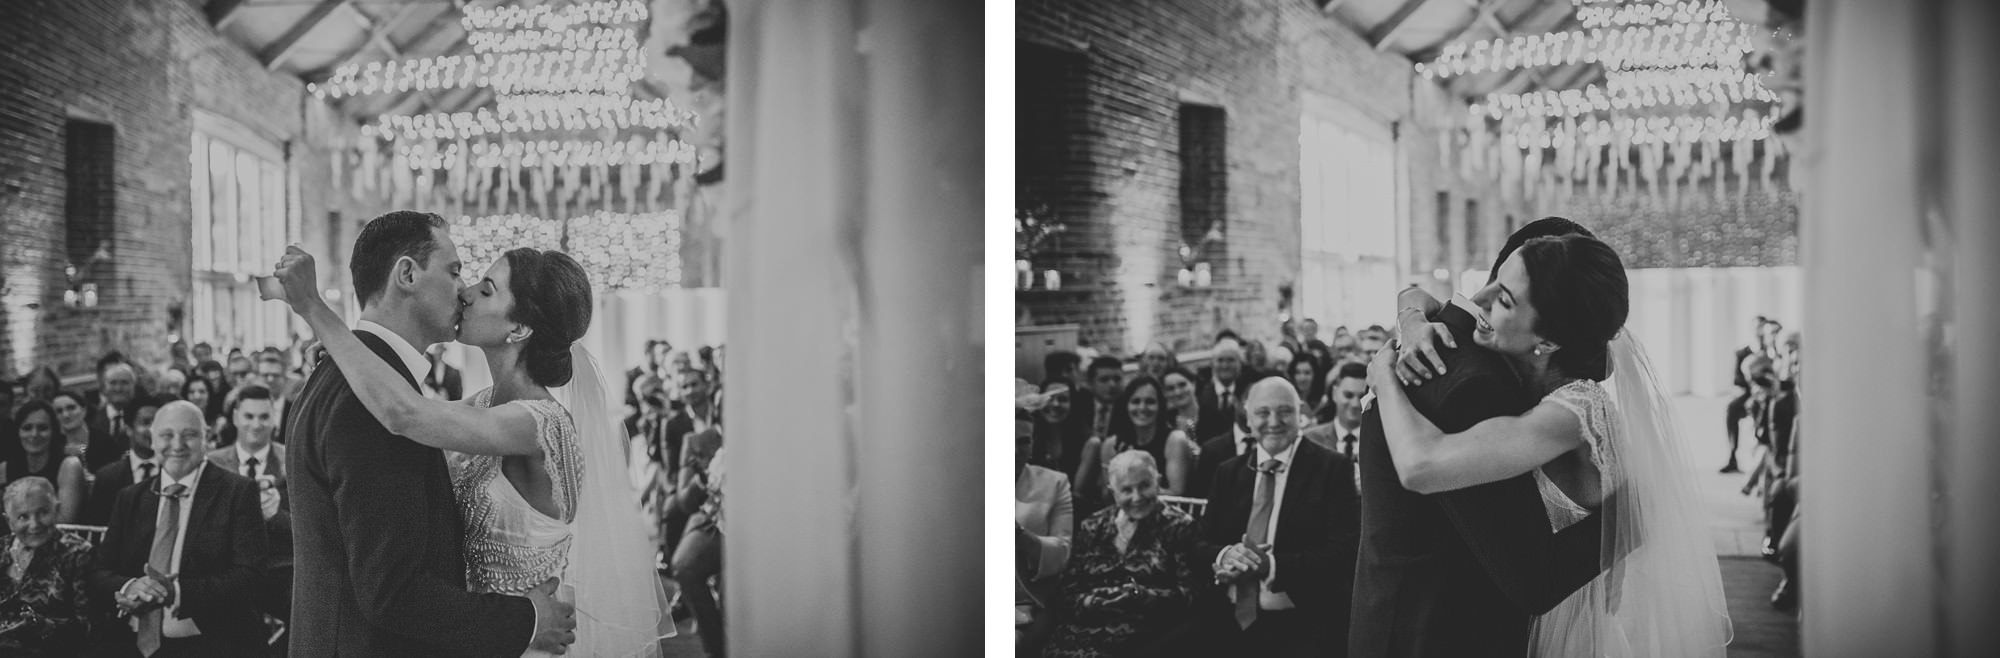 manor-mews-wedding-by-james-powell-photography-014